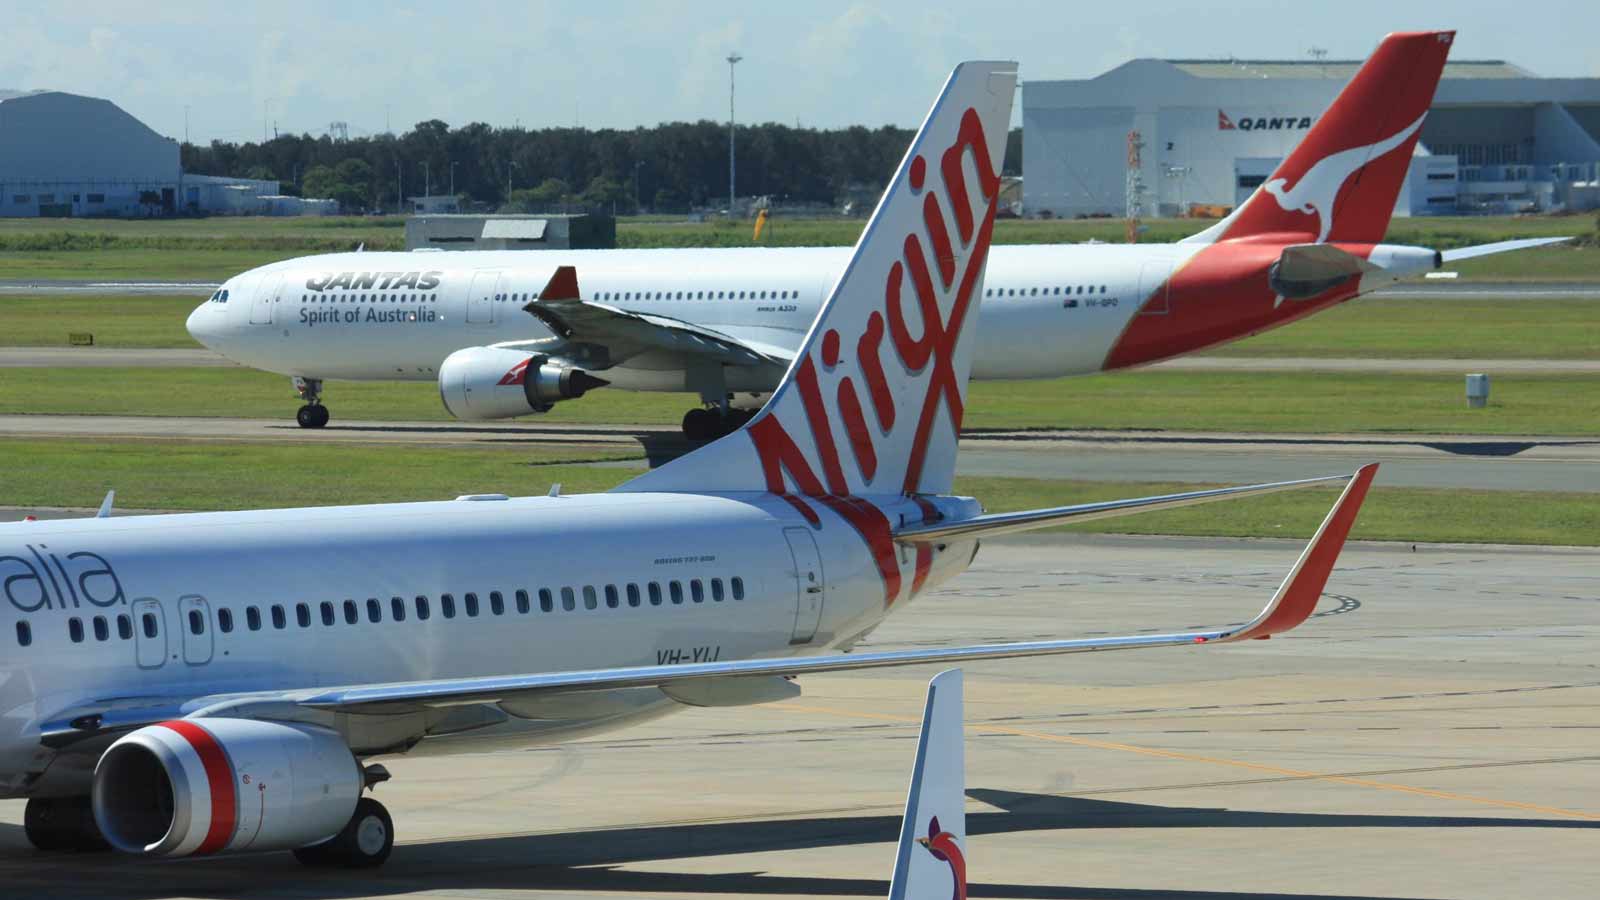 Flight Cancellations Are Hitting Airlines Hard, Except This Australian Carrier